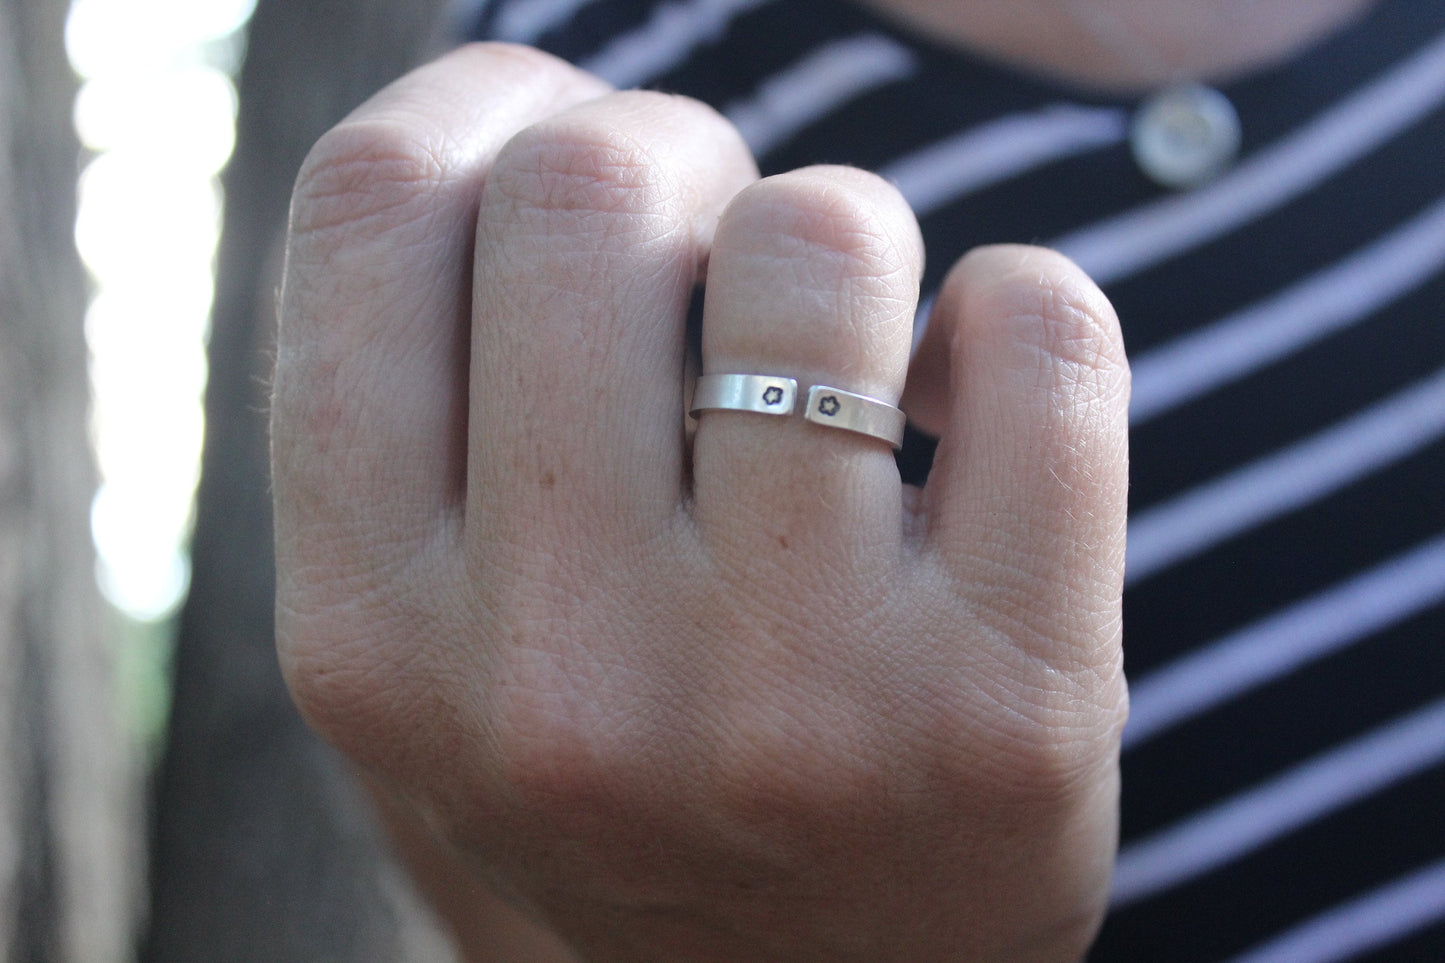 Solid Sterling Silver Writer Ring